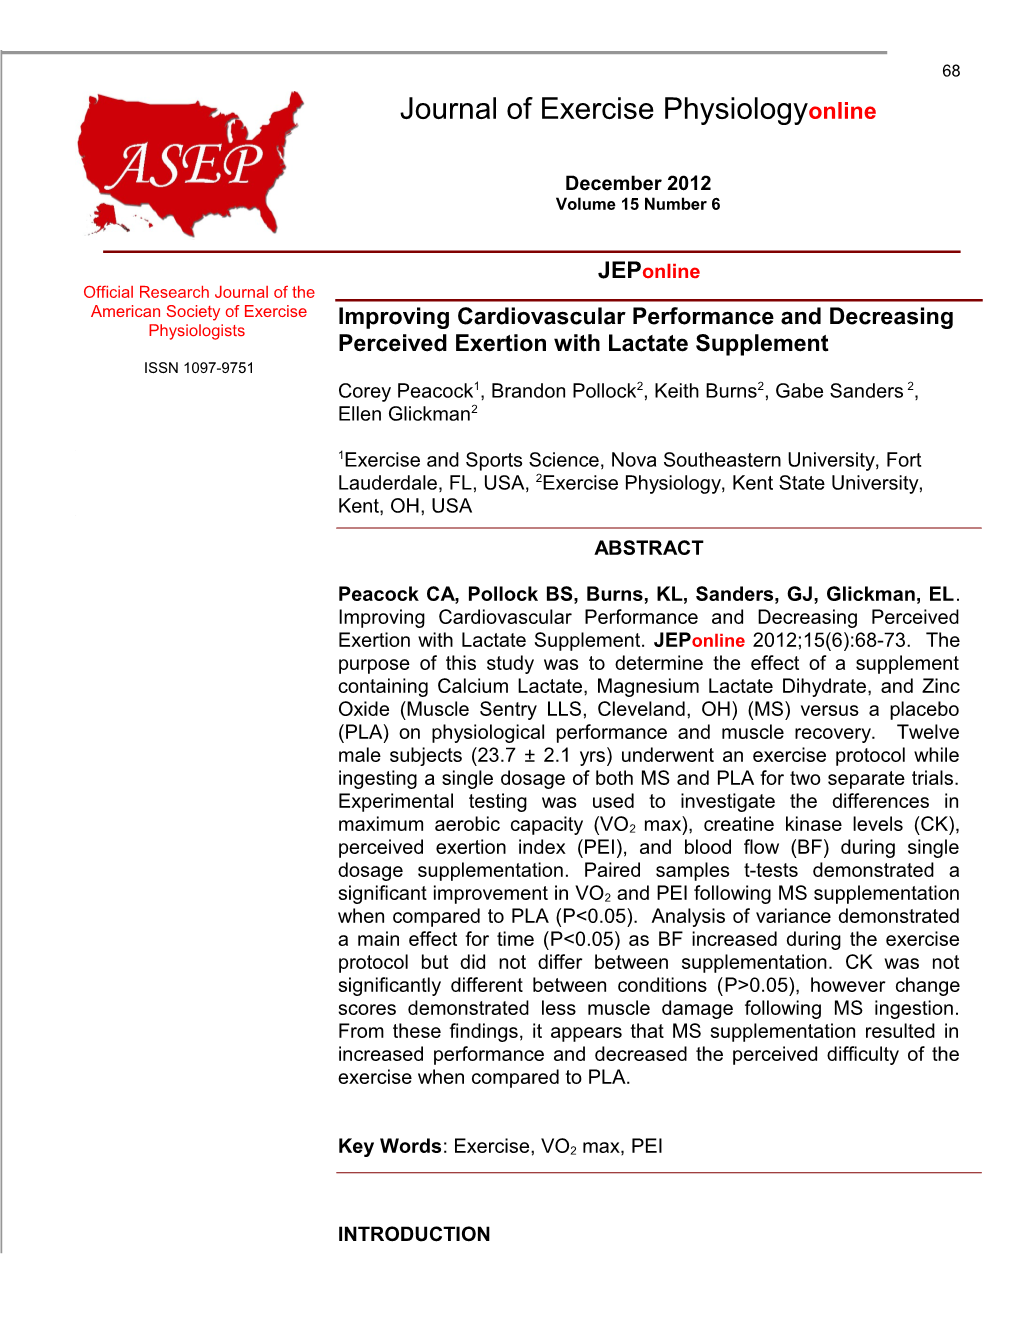 Perceived Exertion with Lactate Supplement